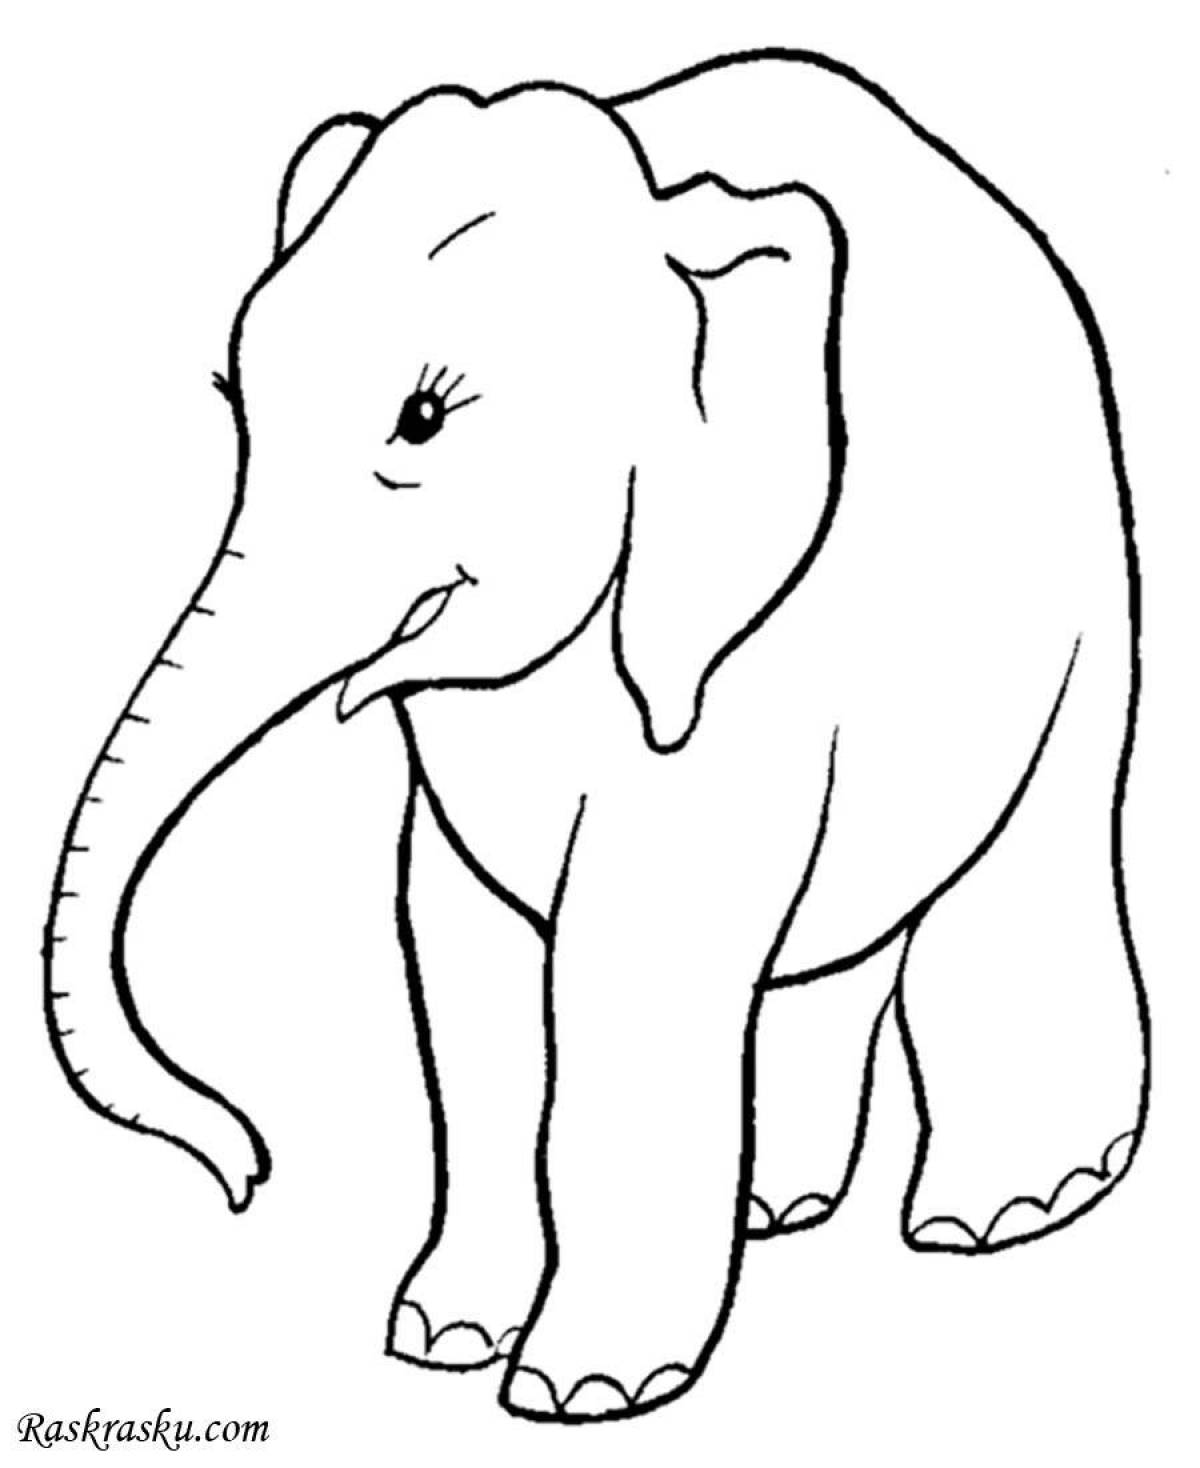 Colorful elephant coloring pages for kids